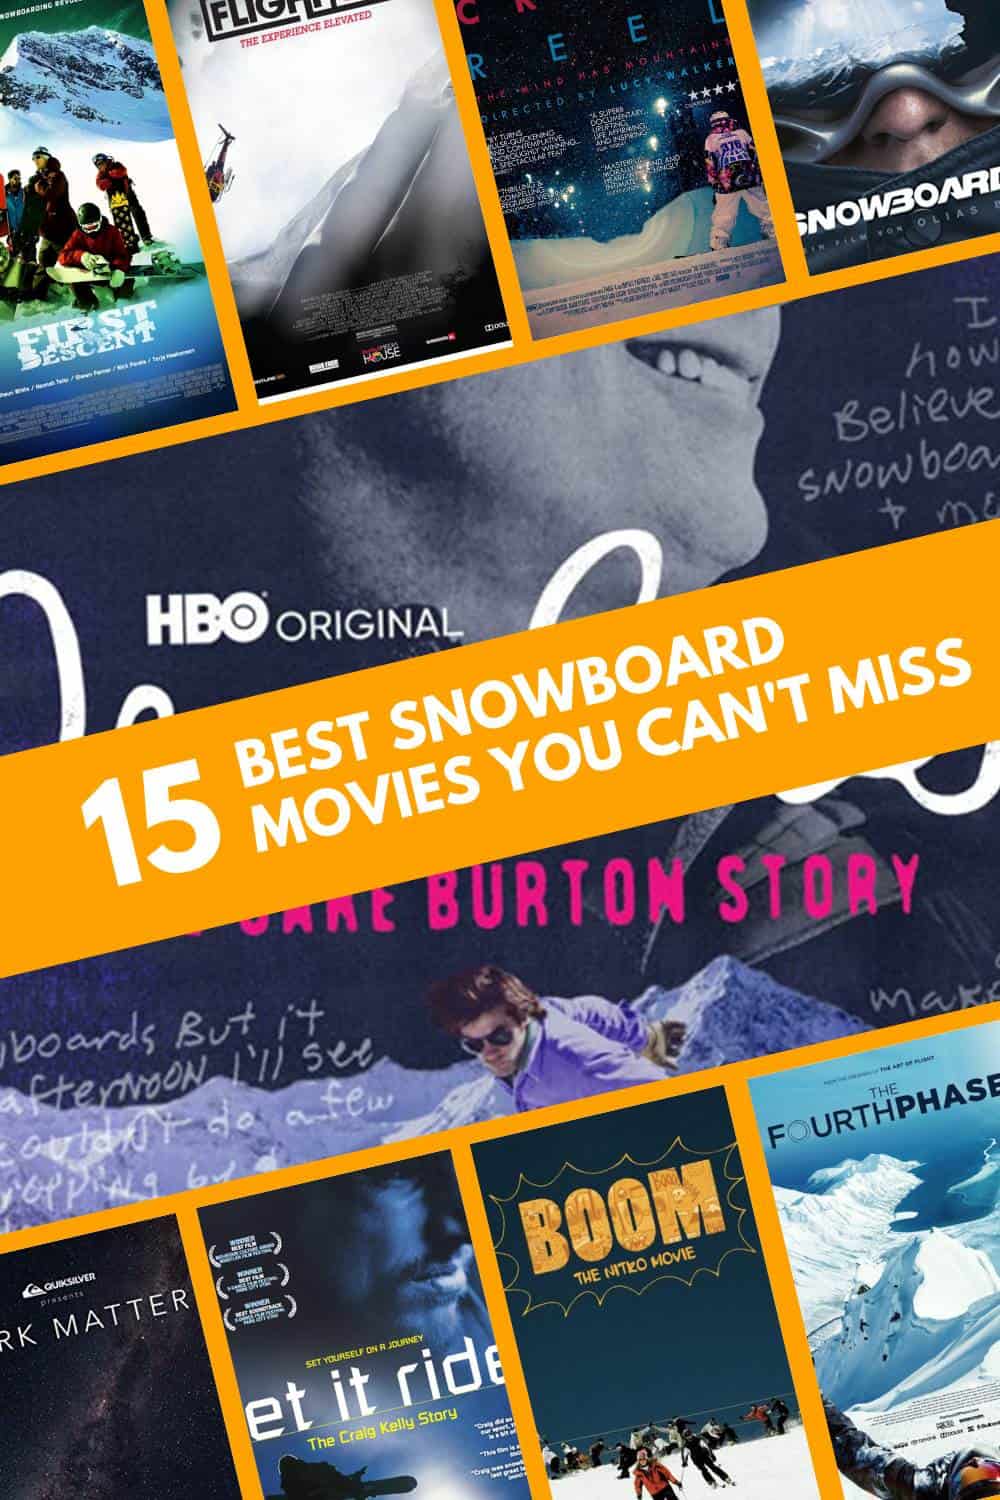 Snowboard Movie You Can't Miss